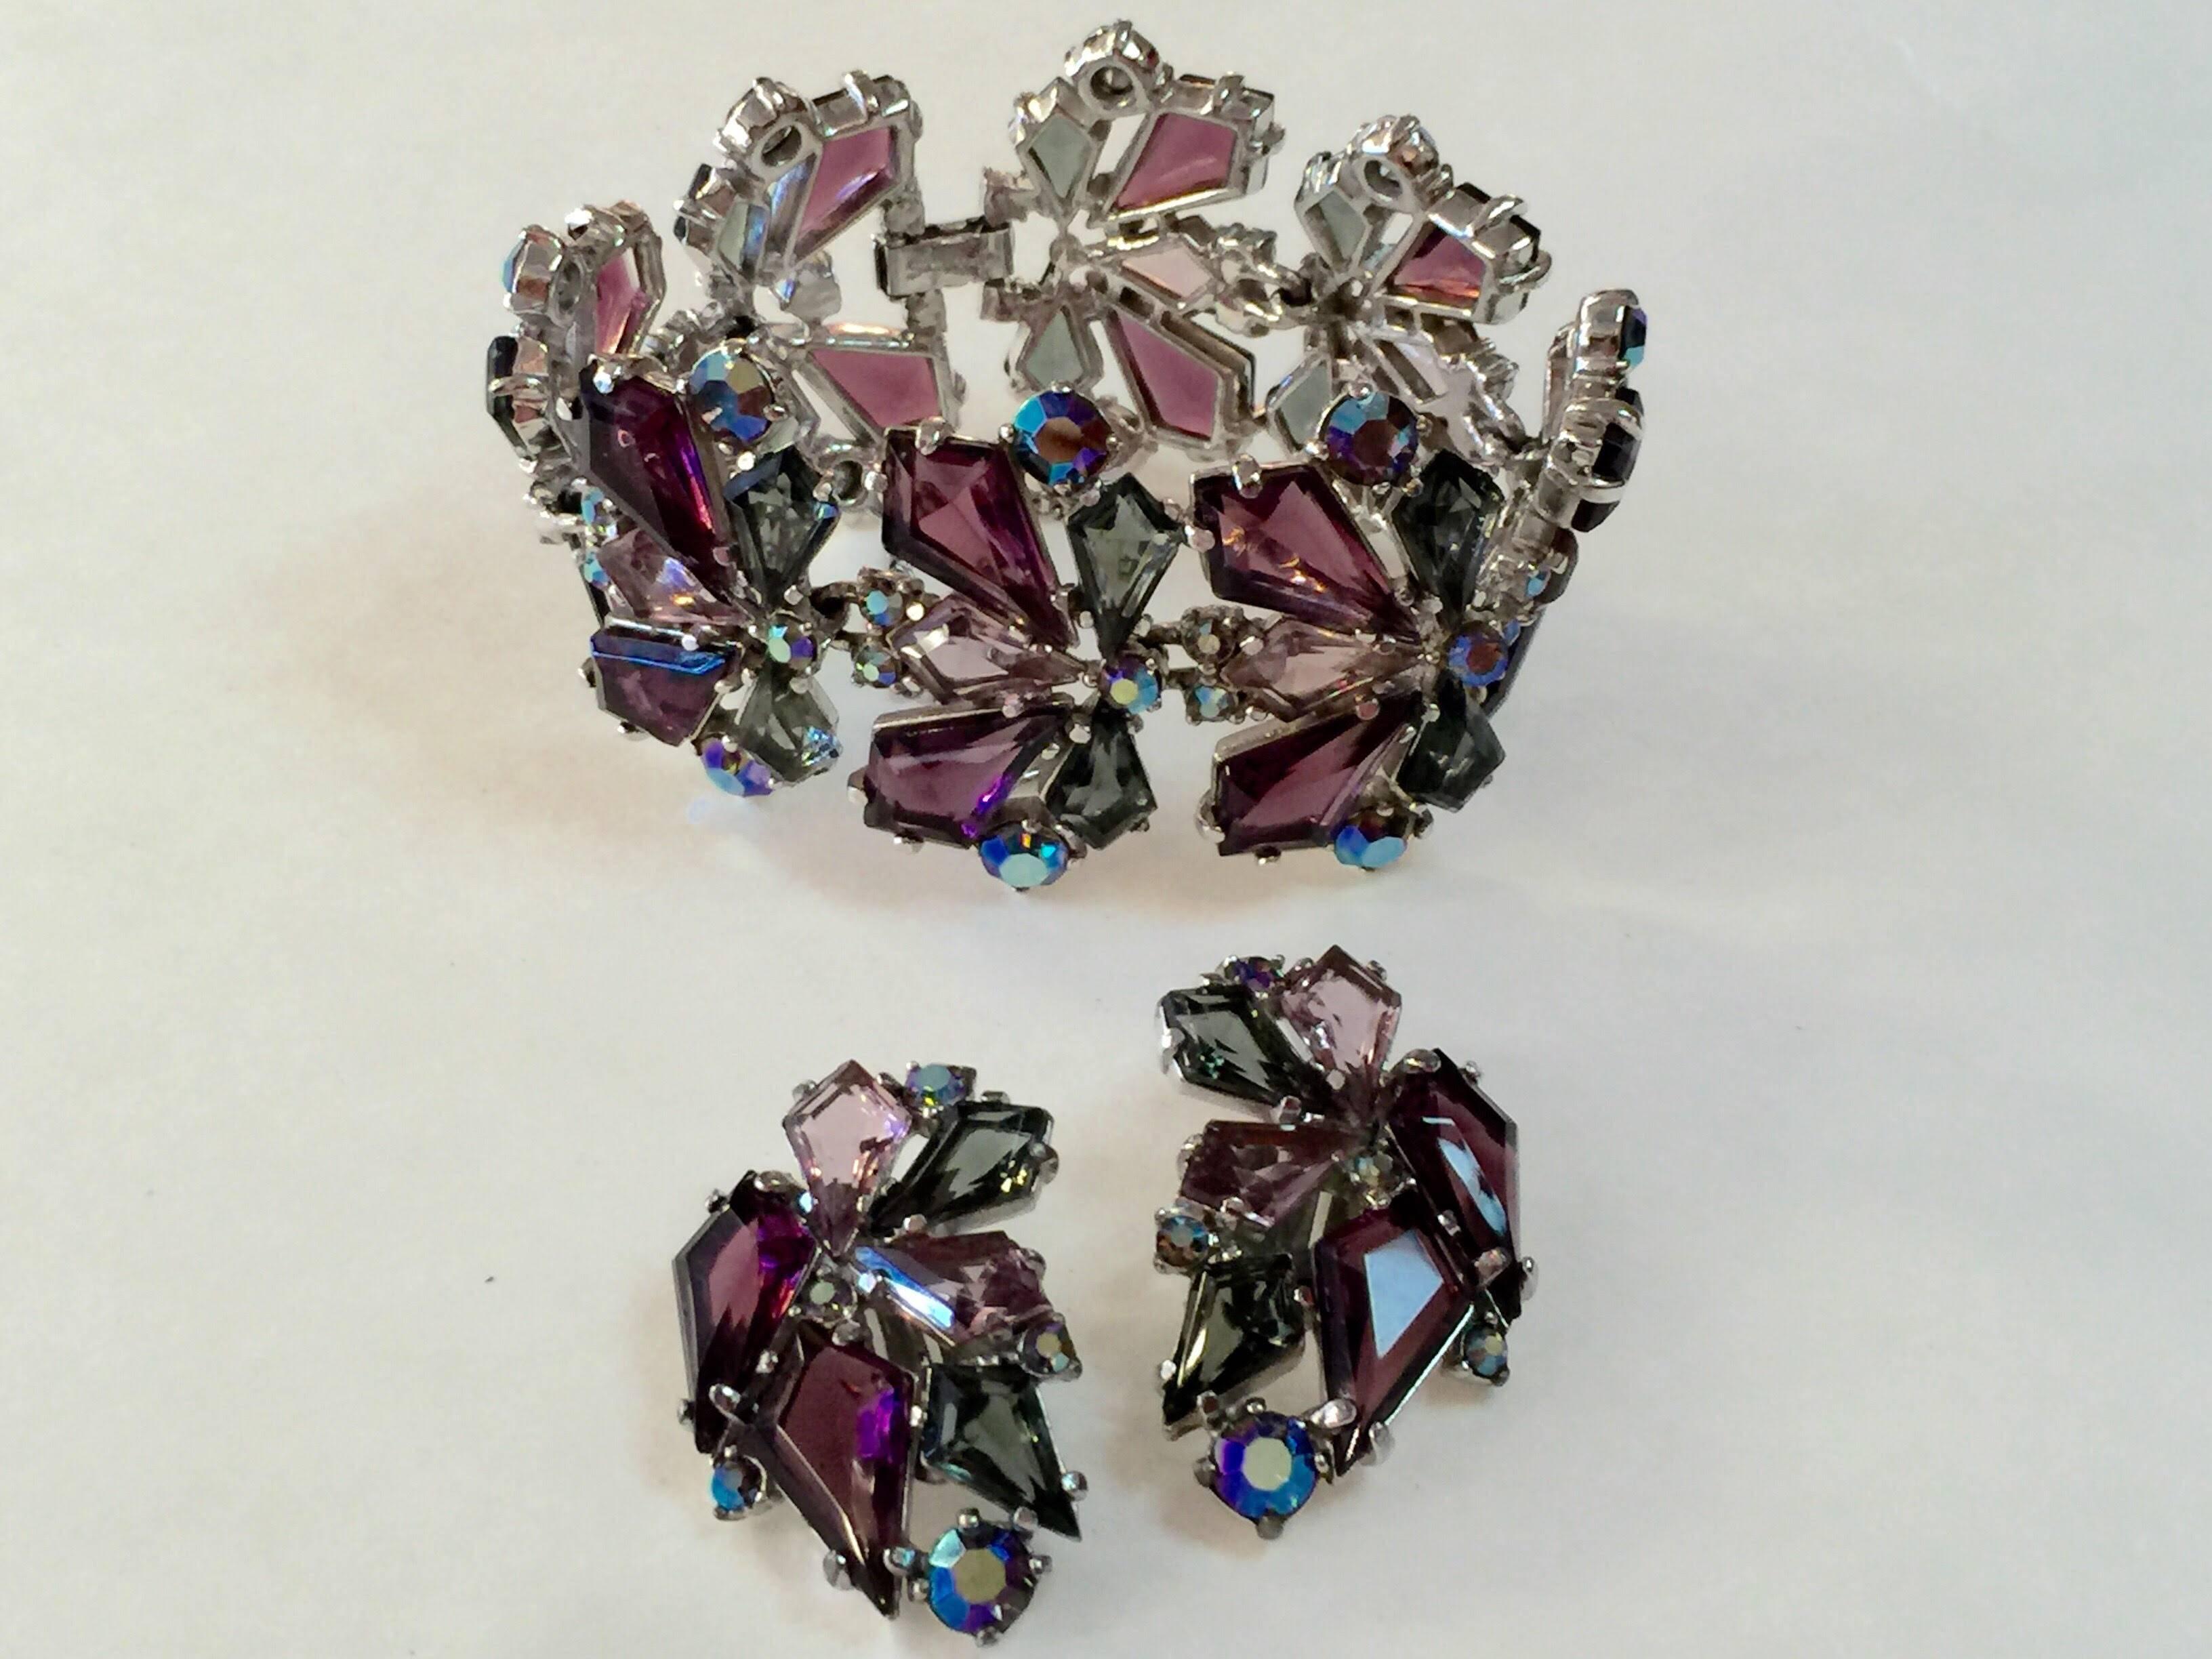 Magificent Costume Jewelry always commands attention and this RARE Schiaparelli Link Bracelet with coordinate Clip On Earrings Set does not disappoint. A sophisticated tonal array of soft lilac purple as well as rich deep amethyst purple, and subtle